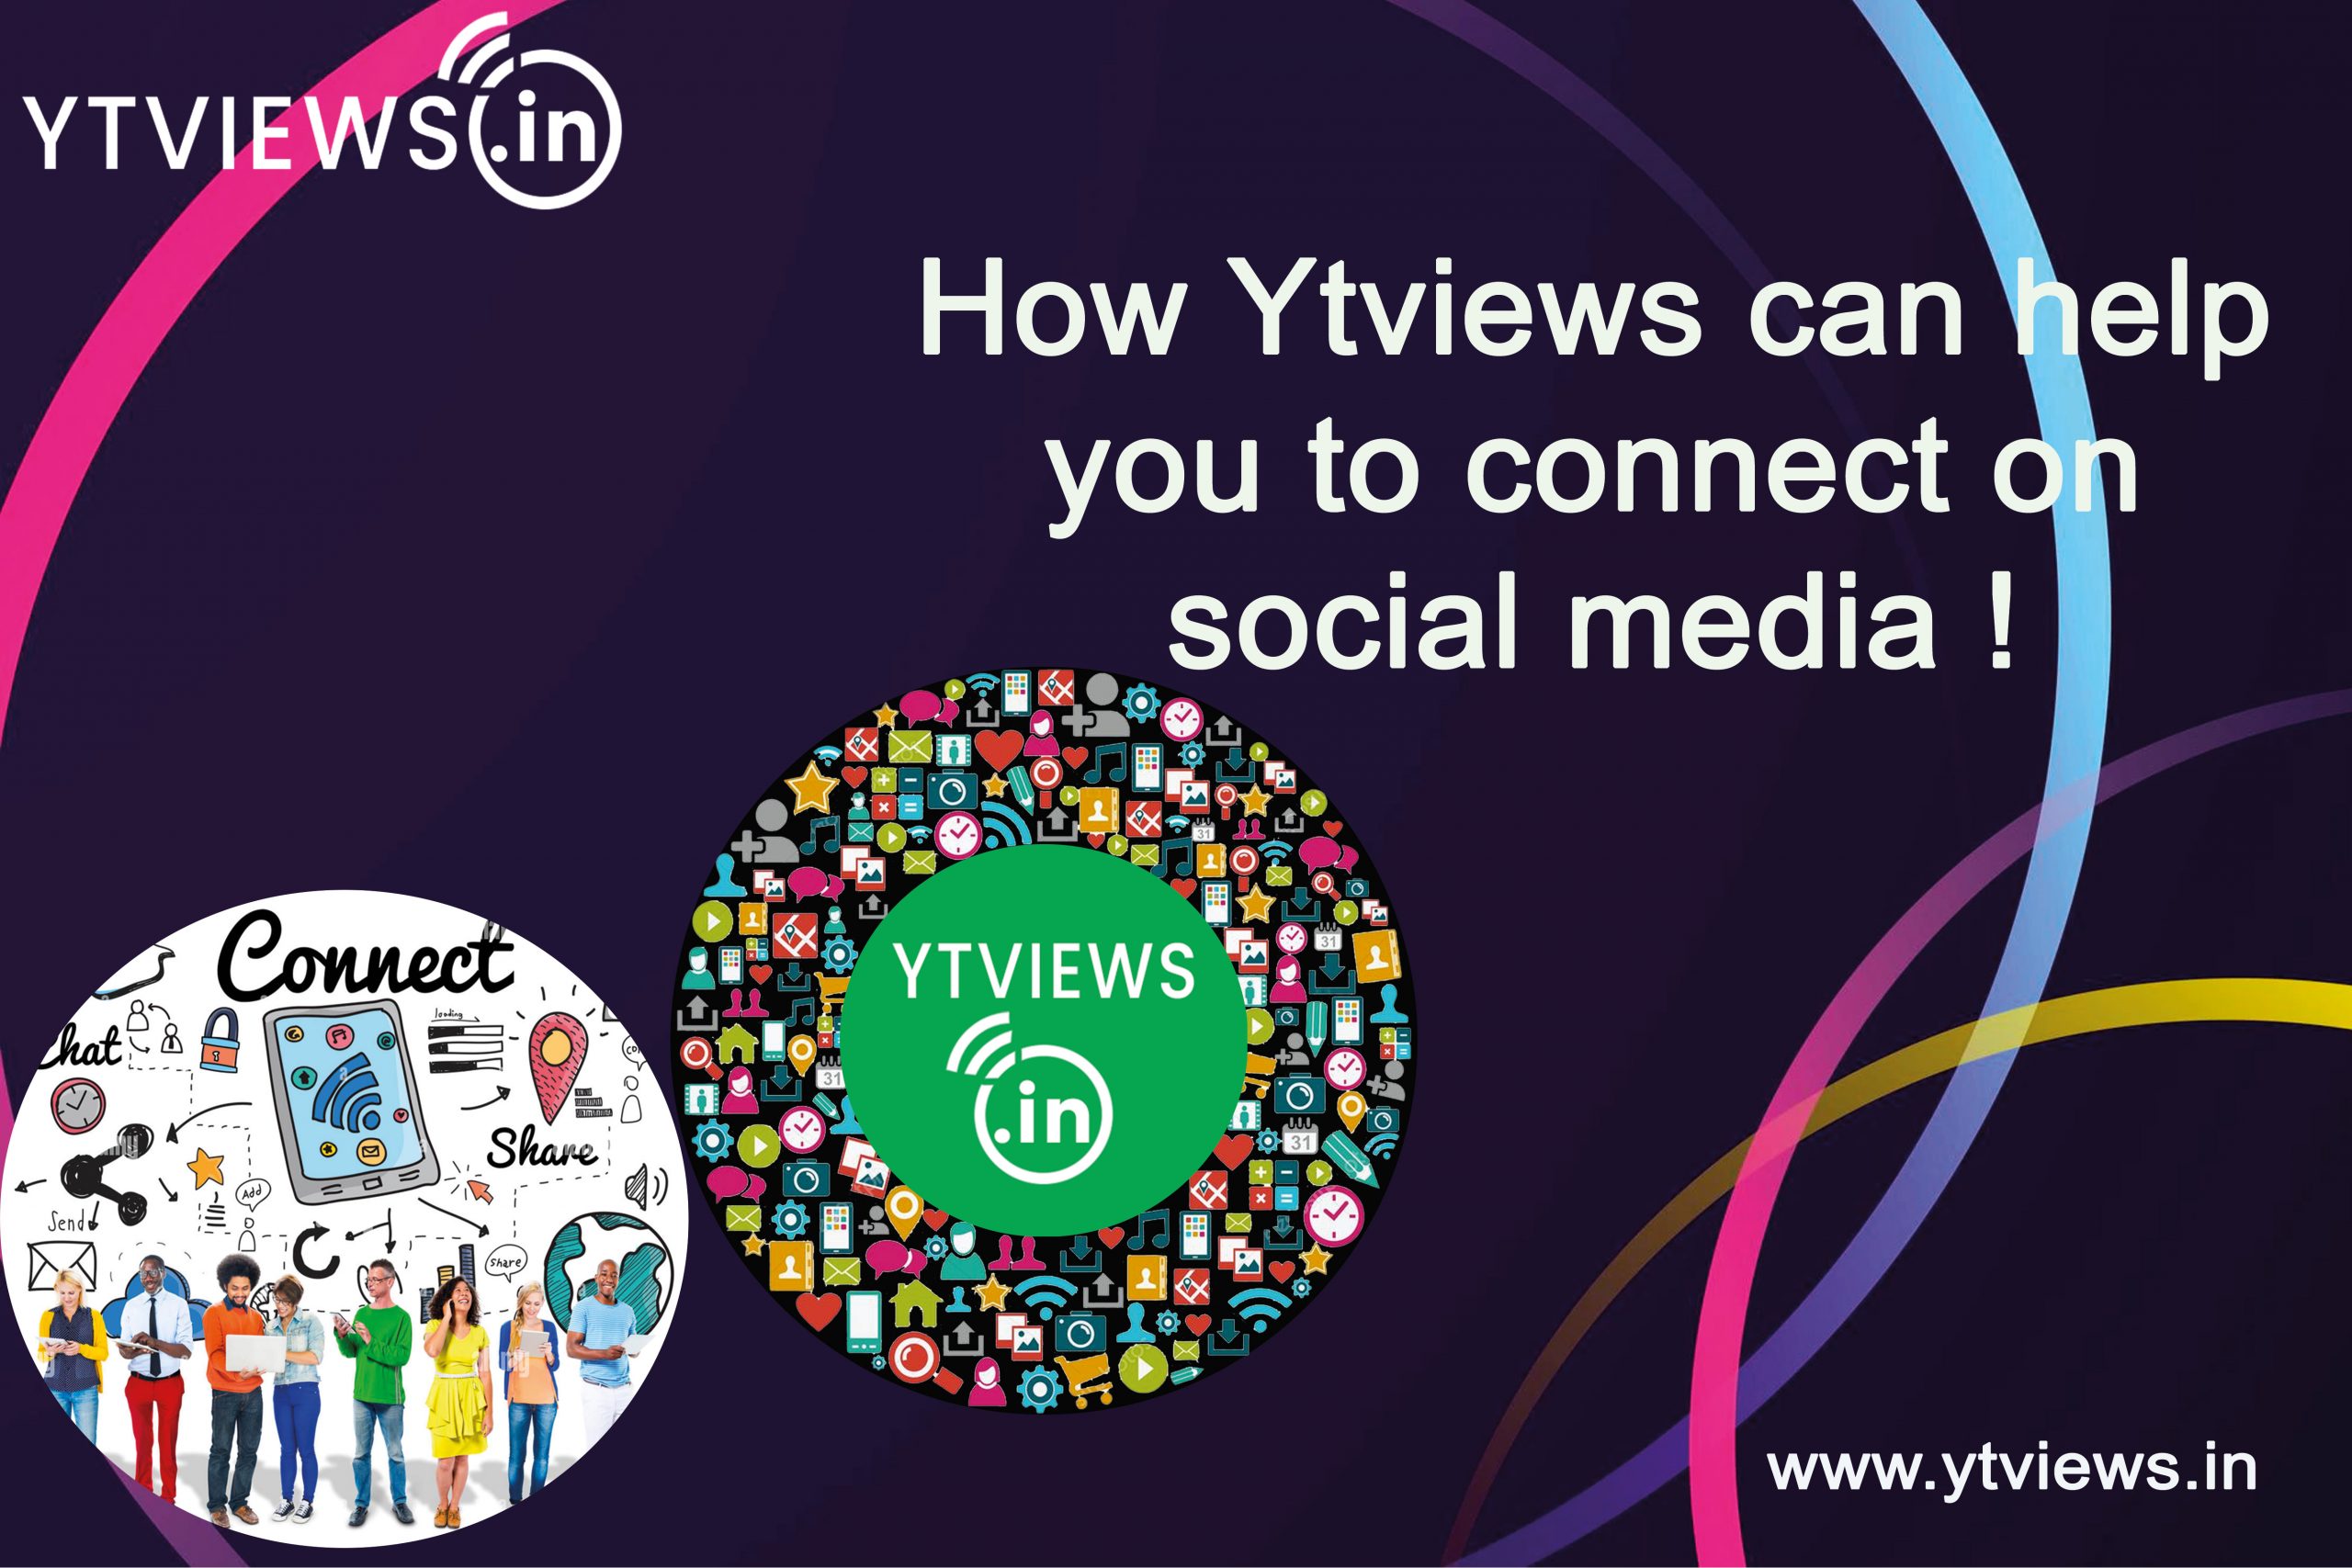 “How Ytviews Can Help You Connect on Social Media?”